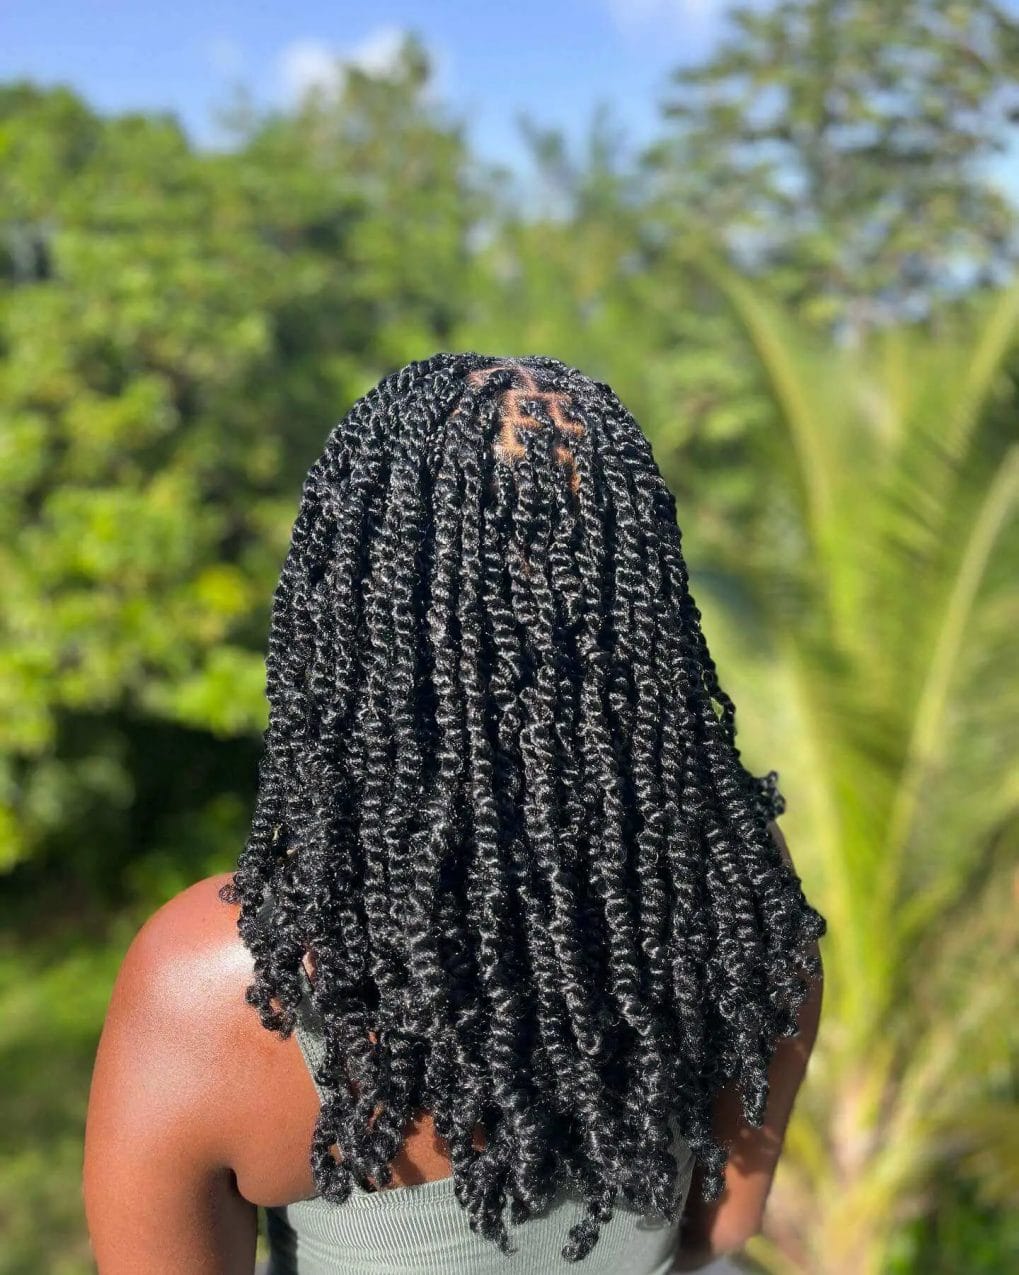 Long, natural black spring twists flowing down the back